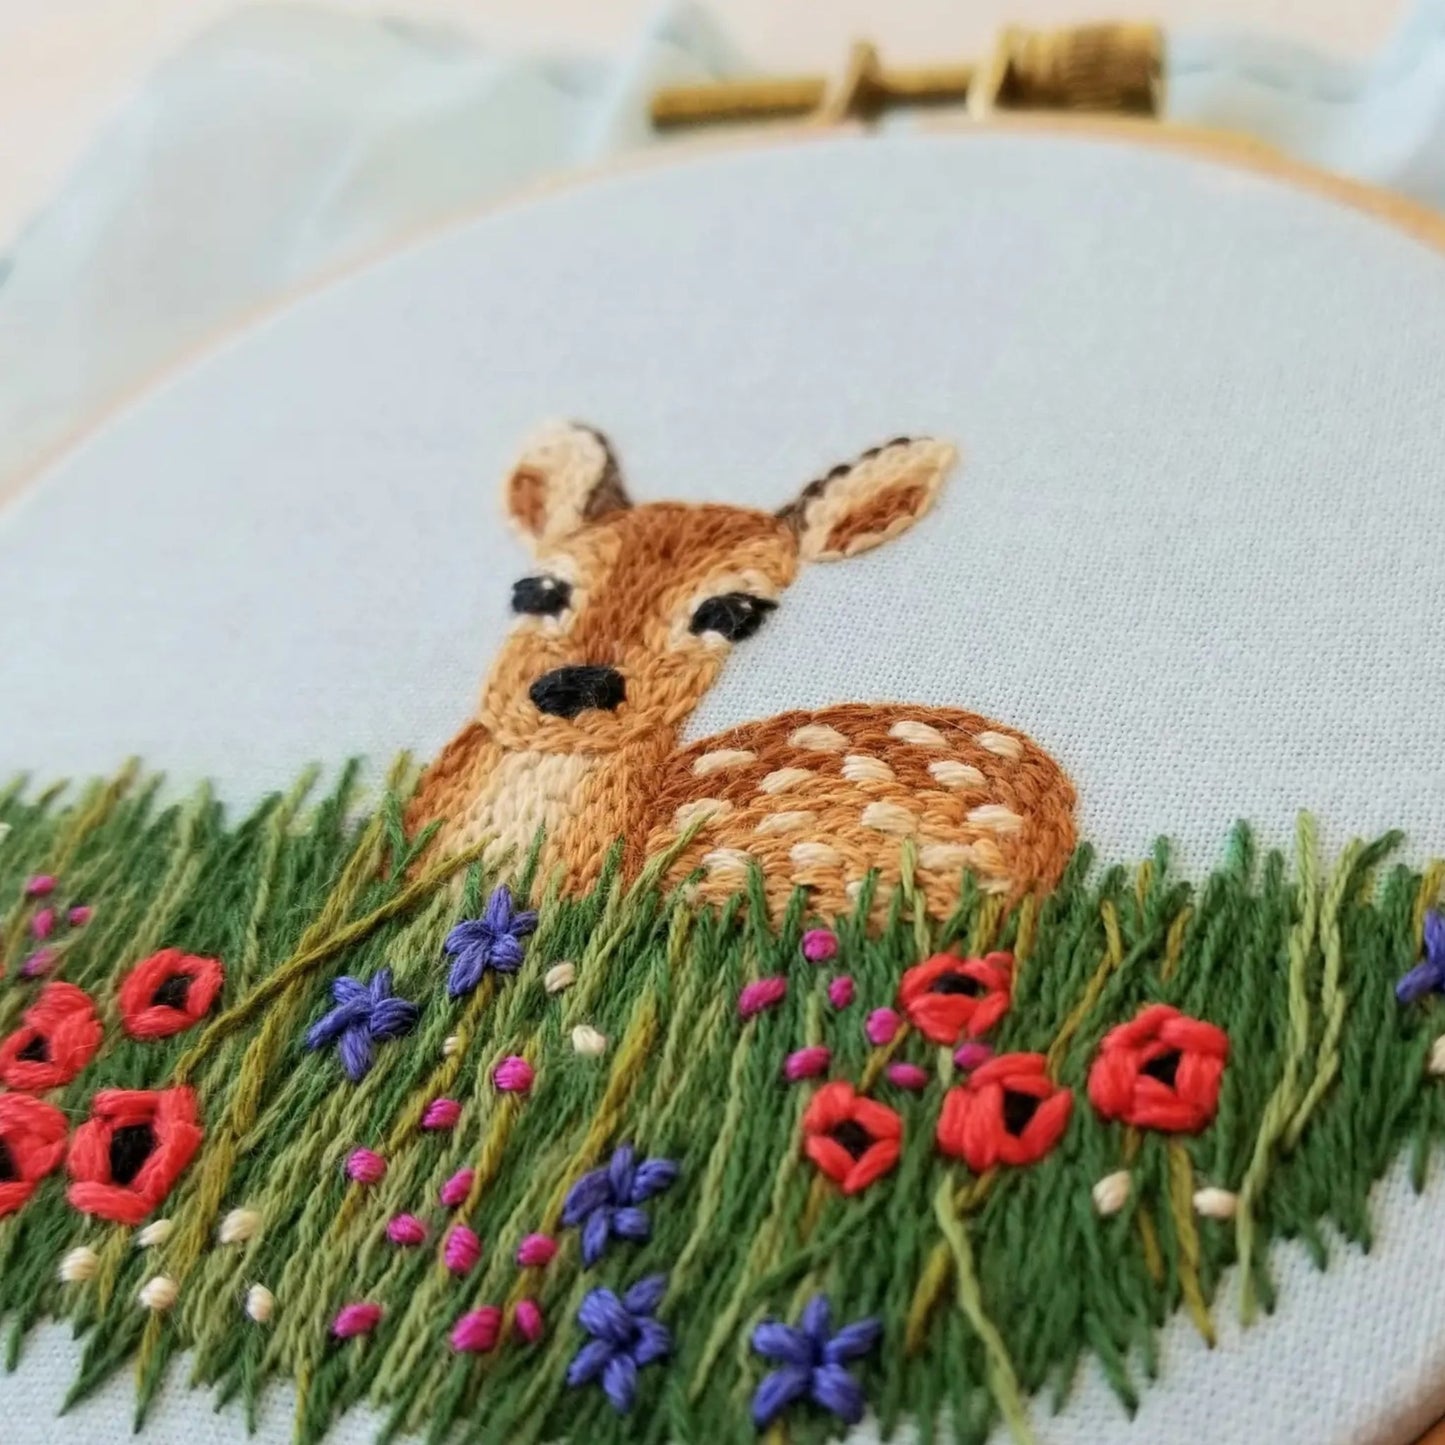 Embroidery Kit - Wildflower Fawn - Made in the USA